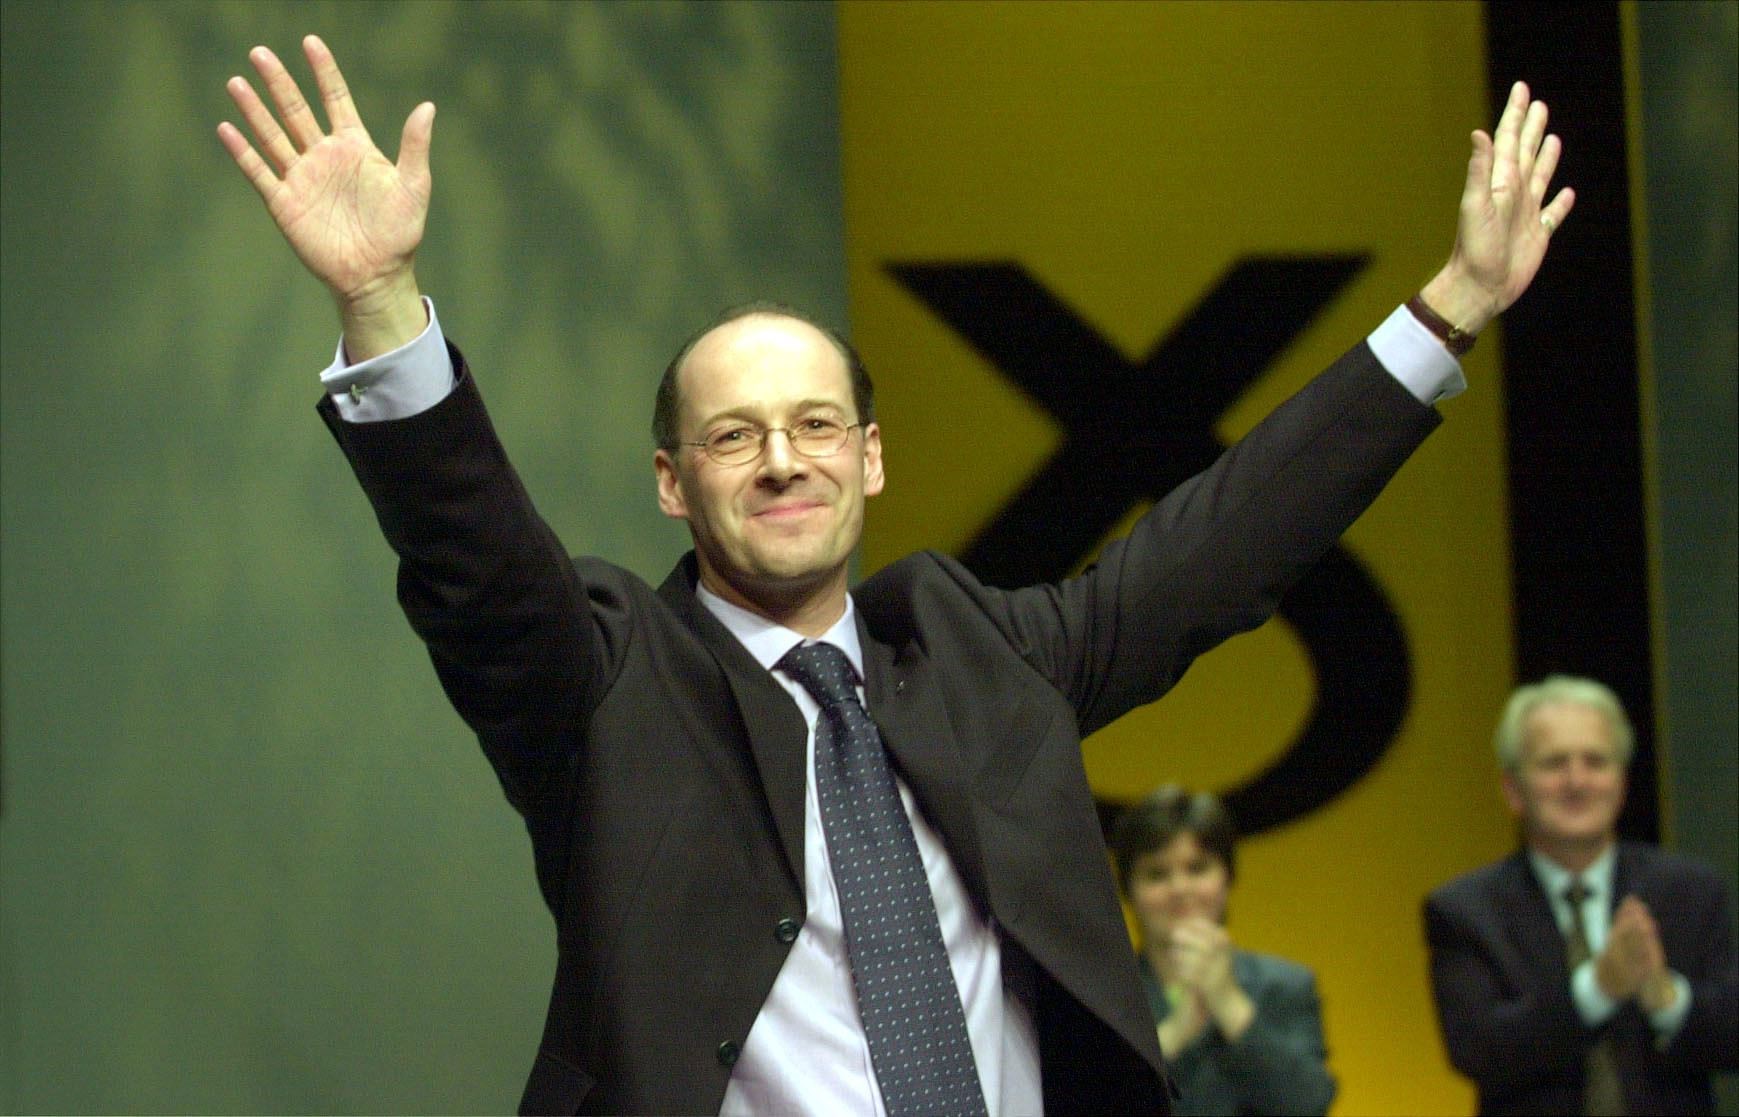 Mr Swinney thanking supporters after being elected SNP leader in 2000 (Ben Curtis/PA)